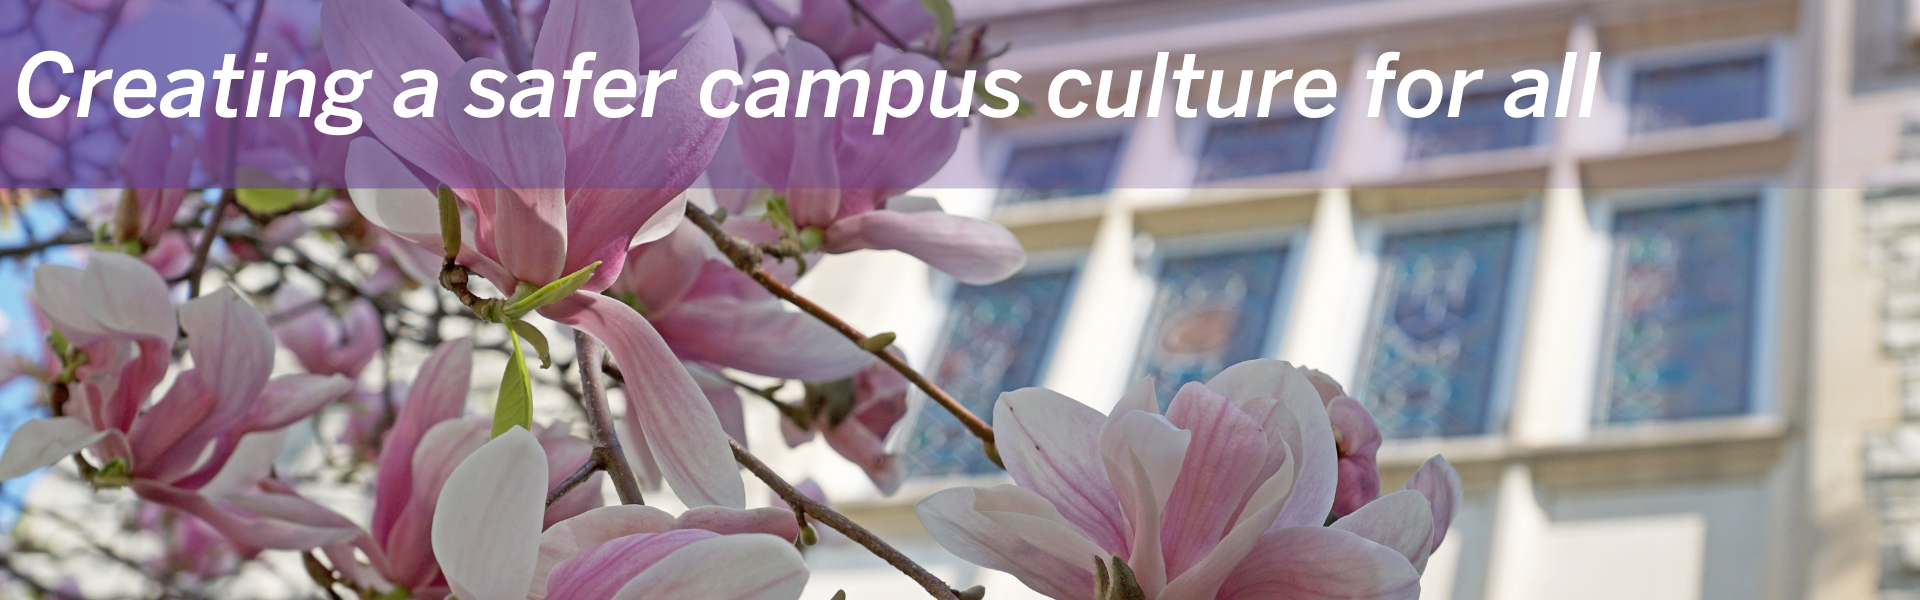 Flowers in bloom on a tree. Text reads:"Creating a safer campus culture for all"